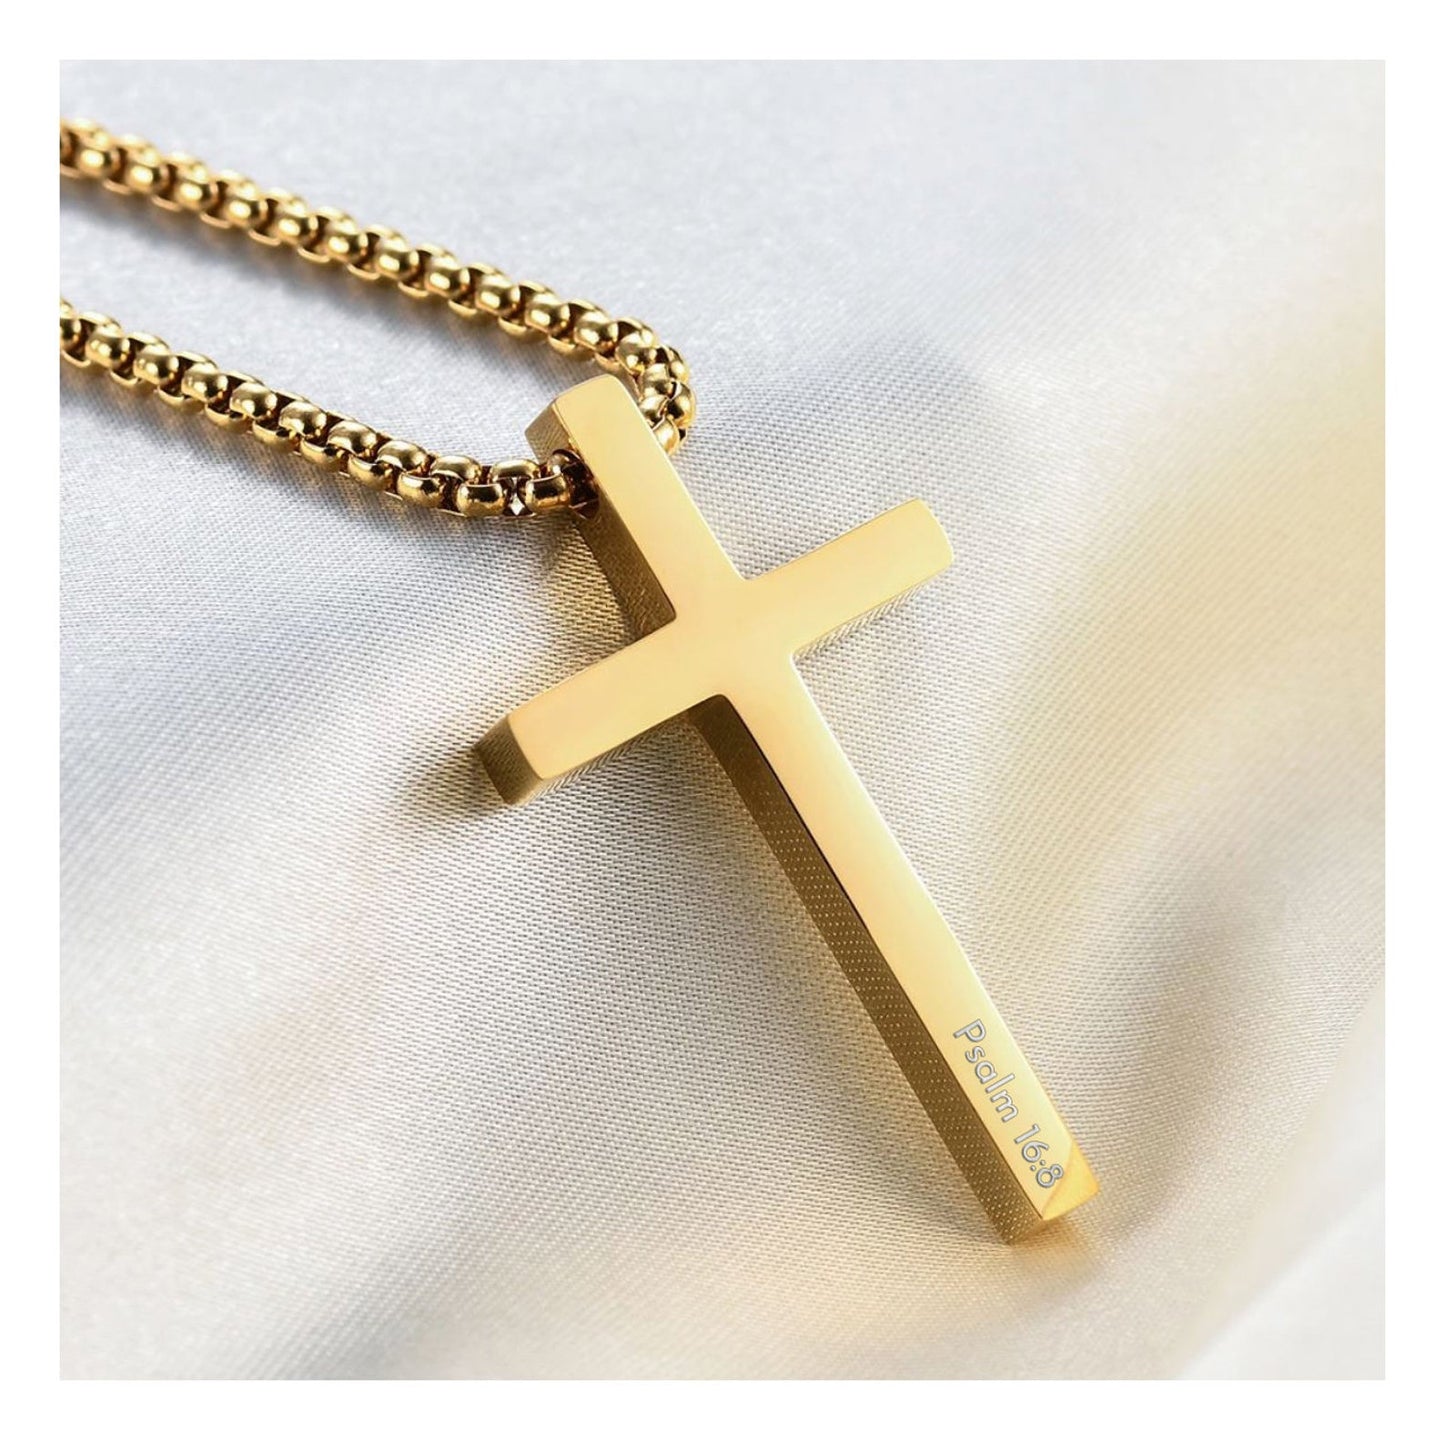 Personalized CROSS NECKLACE Men Mens Custom Engraved Silver Gold Boys Women Jewelry Pendant Necklaces Baptism Christian Bible Verse Gifts